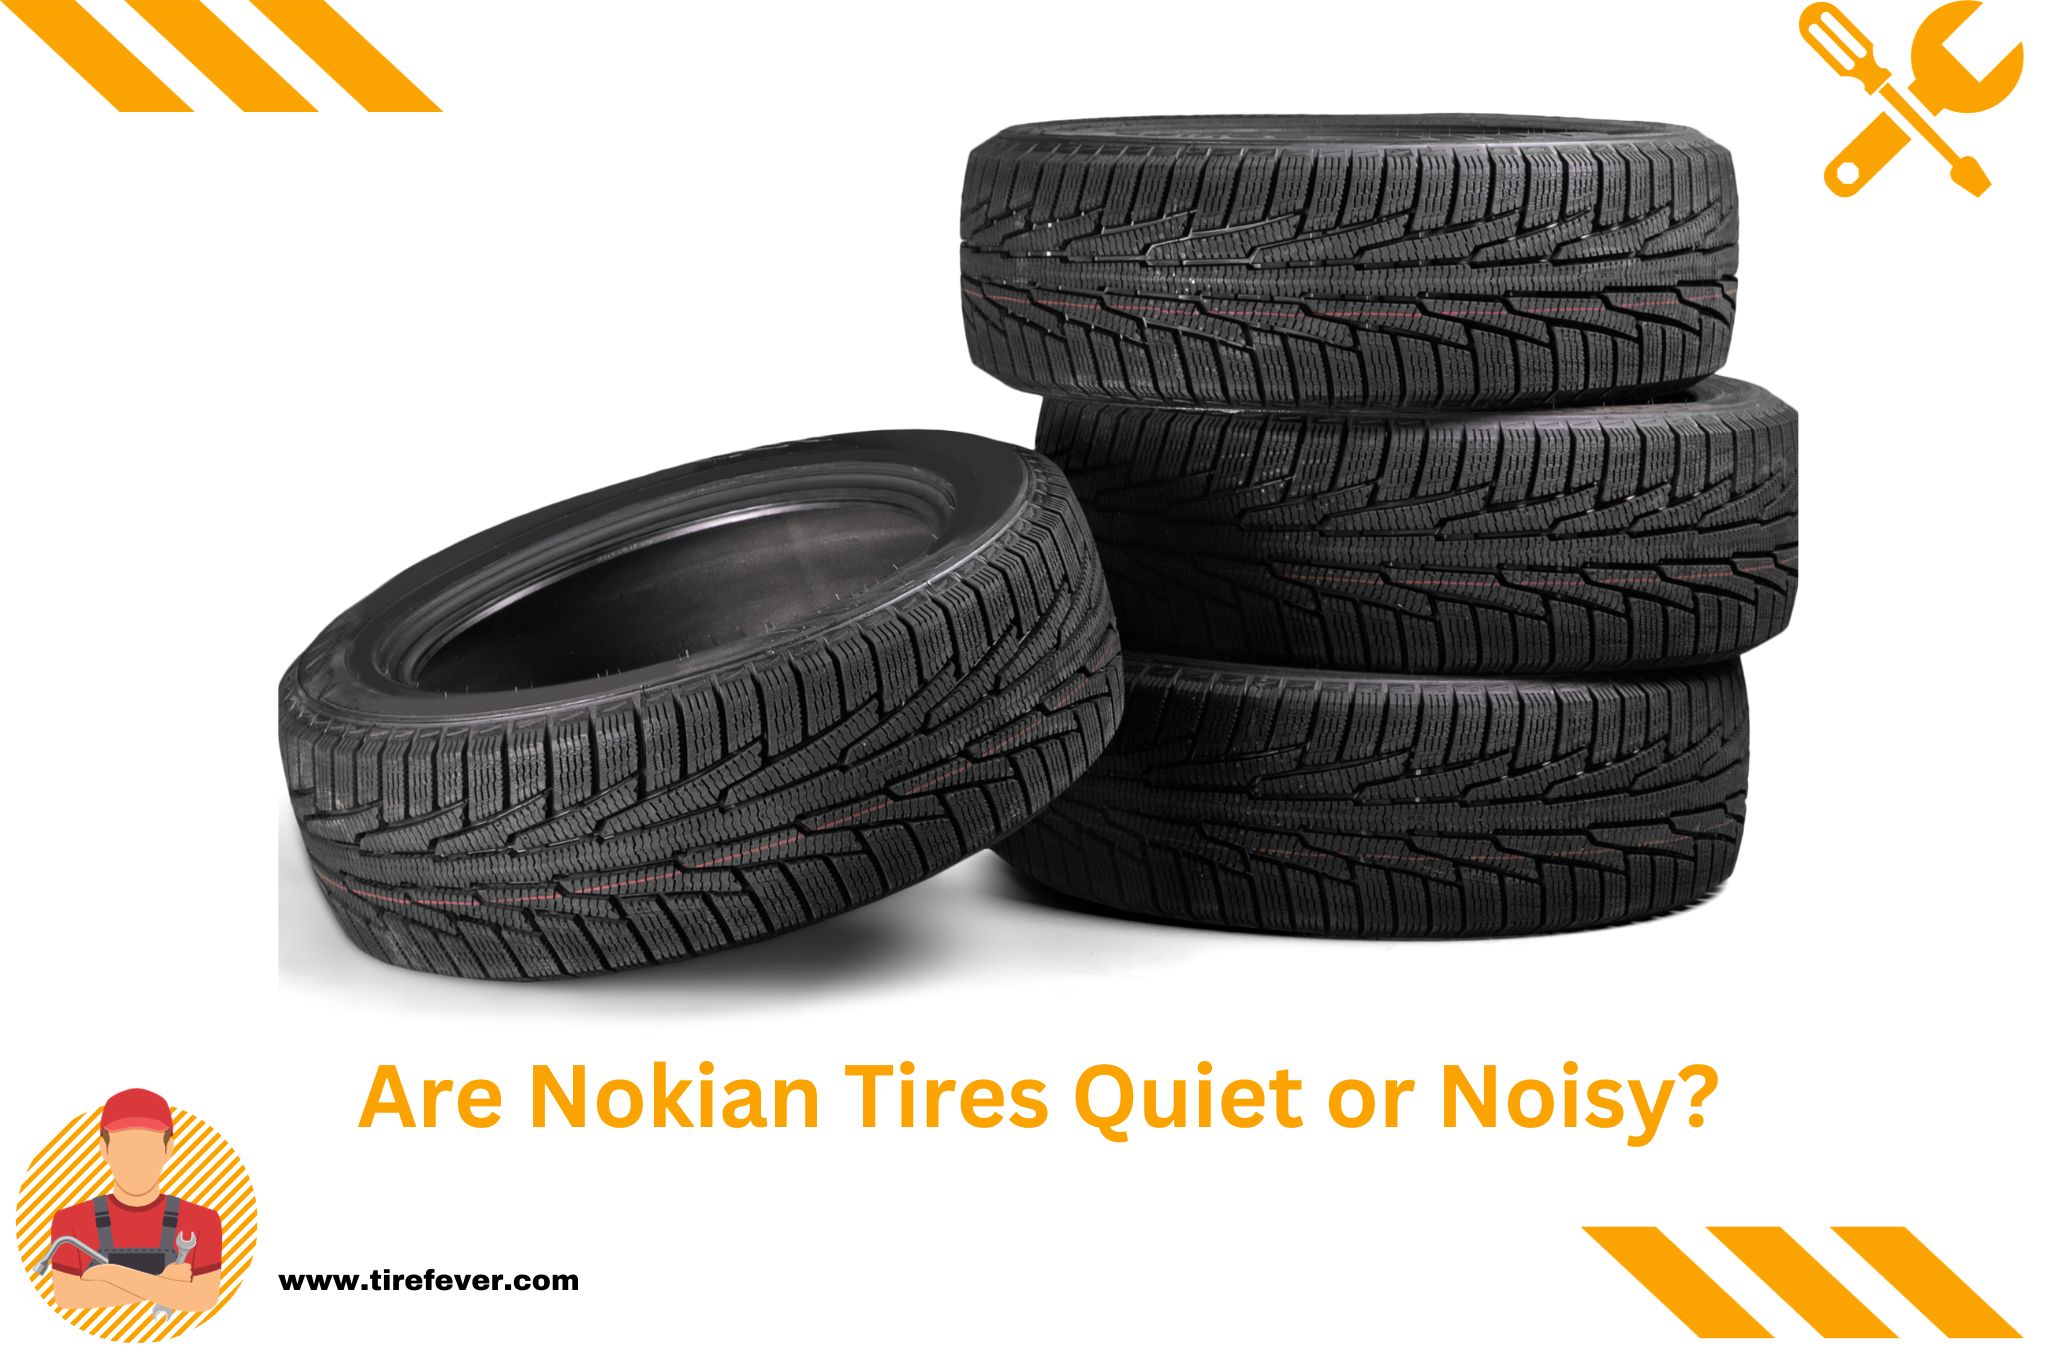 Are Nokian Tires Quiet or Noisy?